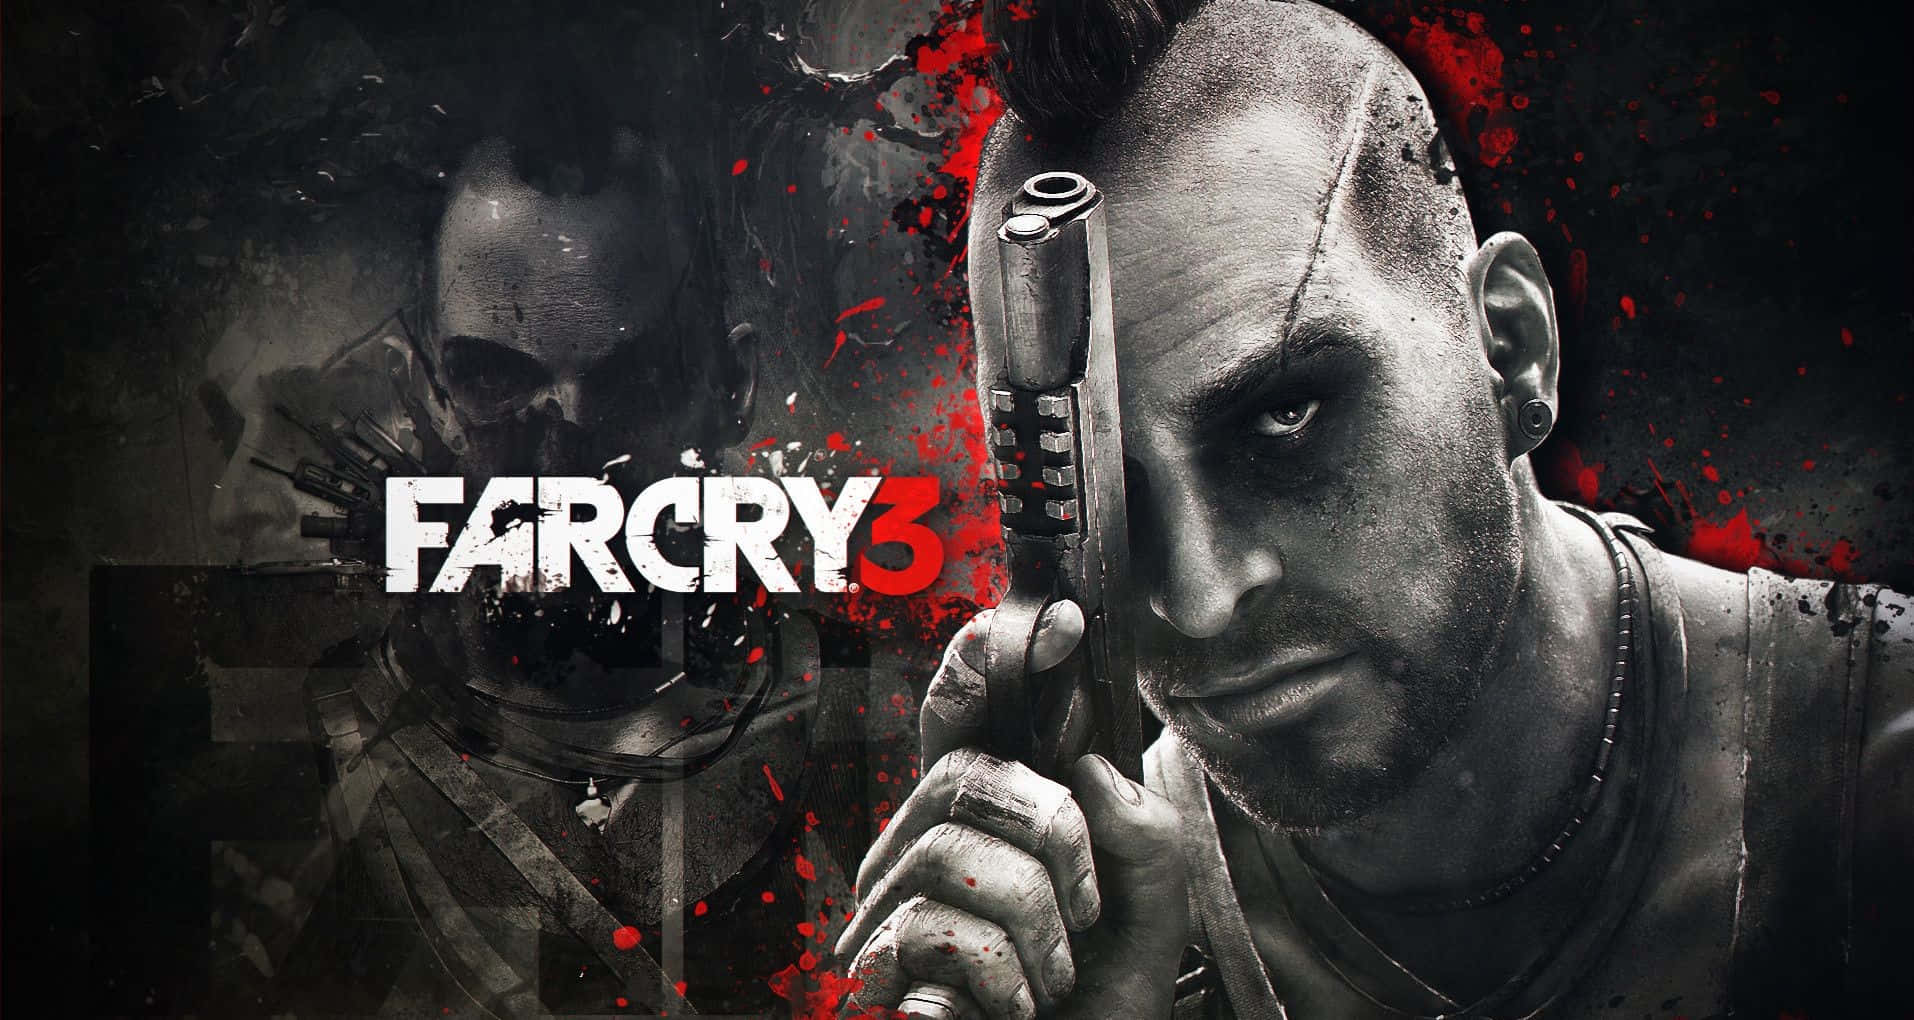 "Vaas Montenegro: The Face of Insanity" Wallpaper